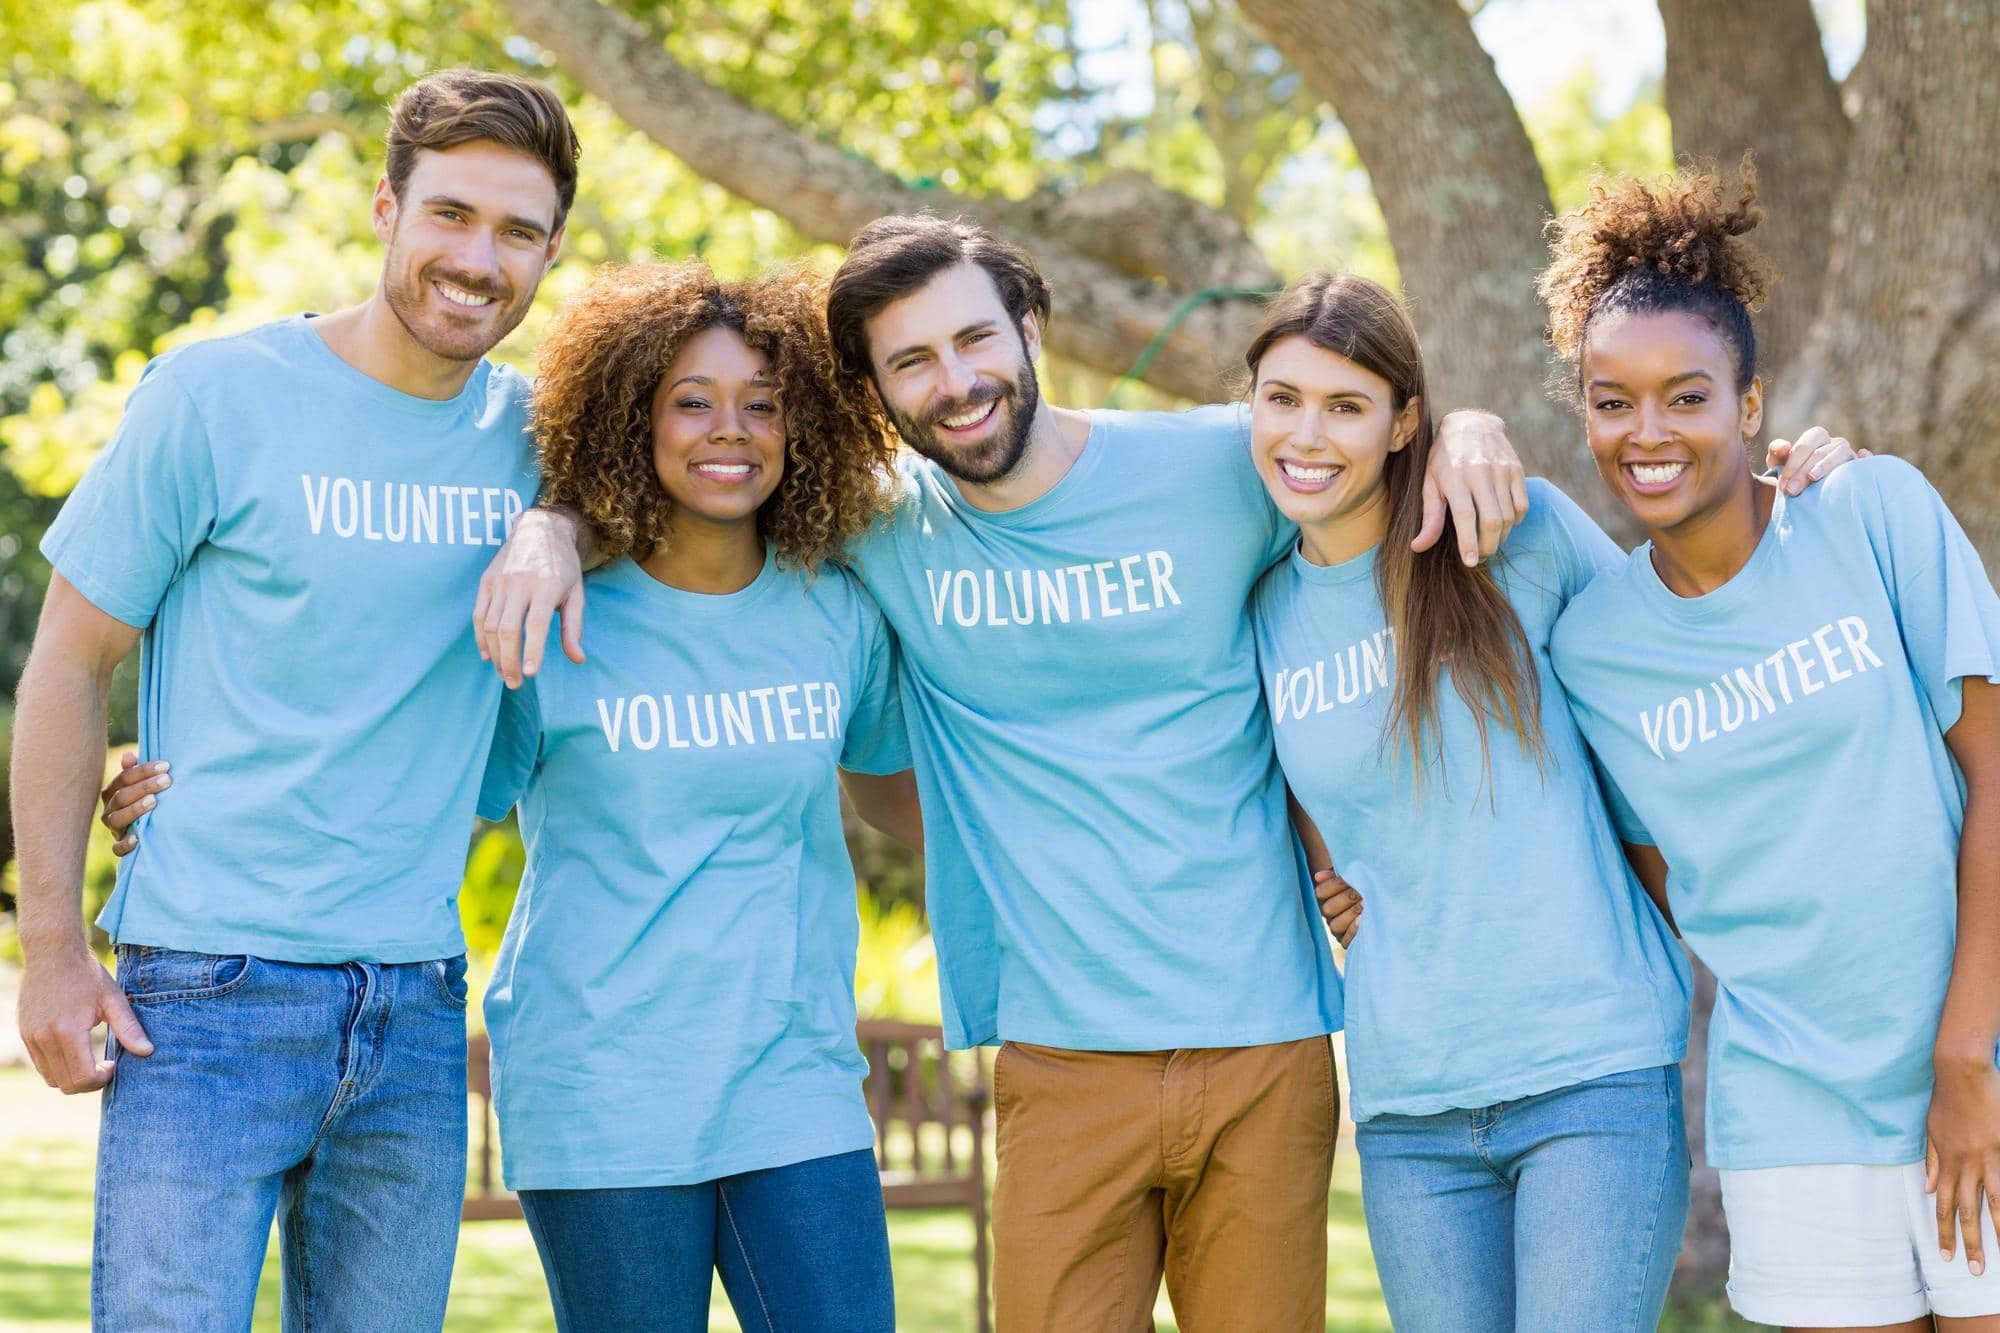 volunteer group who give back to their community